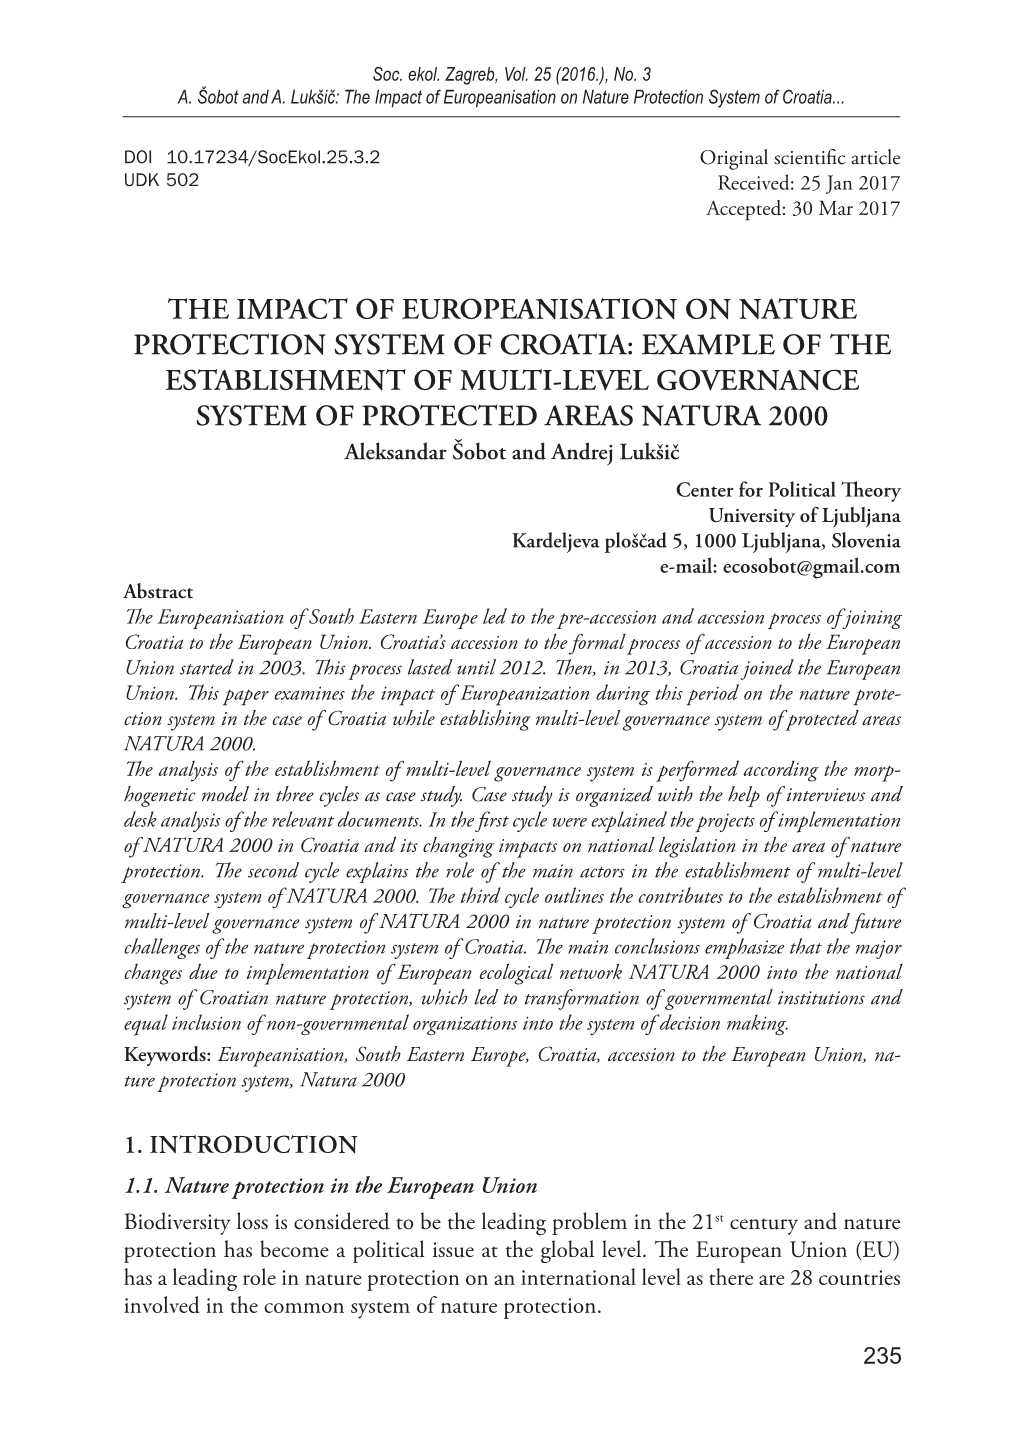 The Impact of Europeanisation on Nature Protection System of Croatia